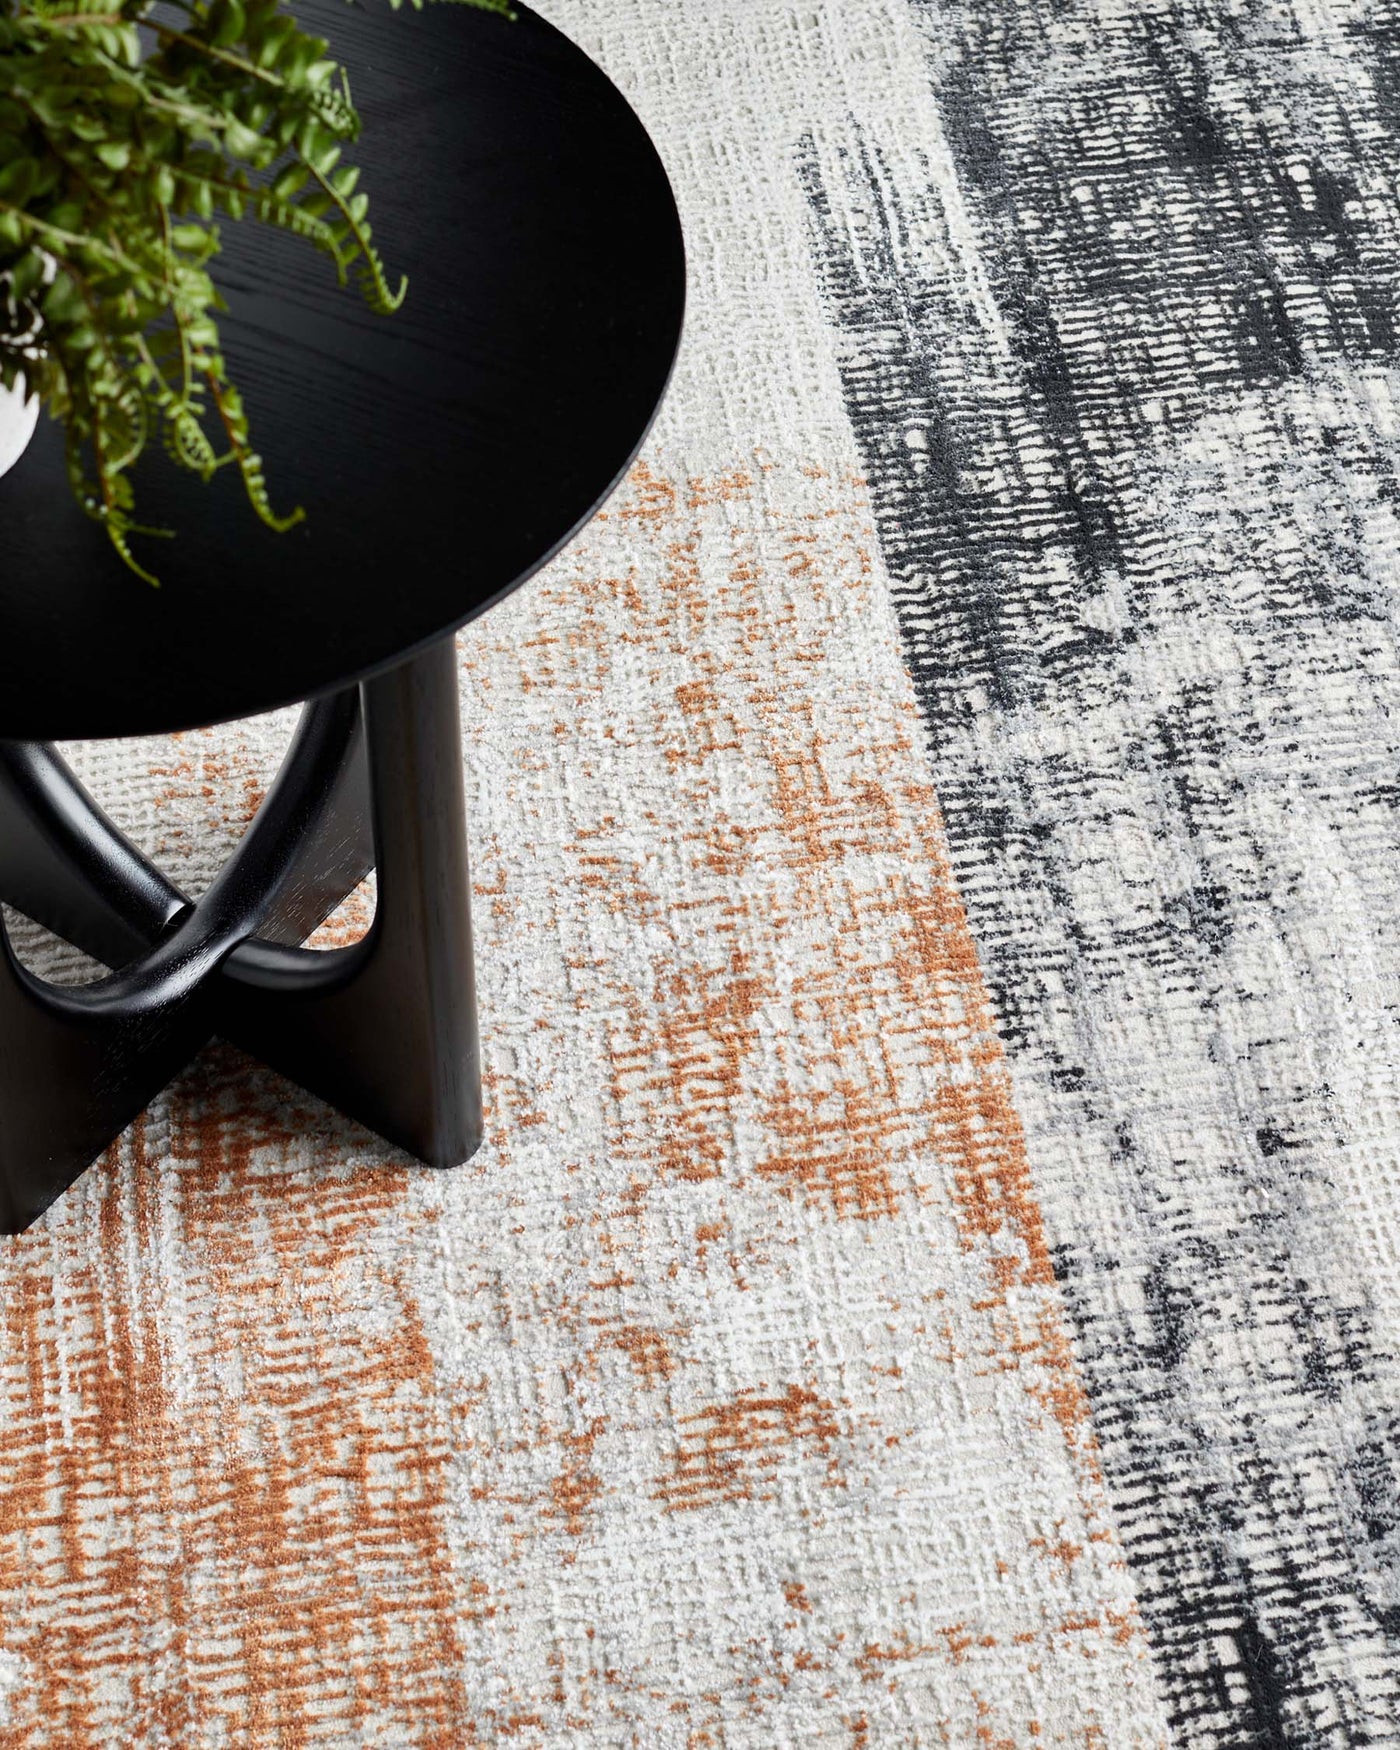 A modern circular black side table with three intersecting legs, partially displaying a fresh green fern on top. The table rests on a contemporary area rug with an abstract design featuring white, grey, and terracotta hues.